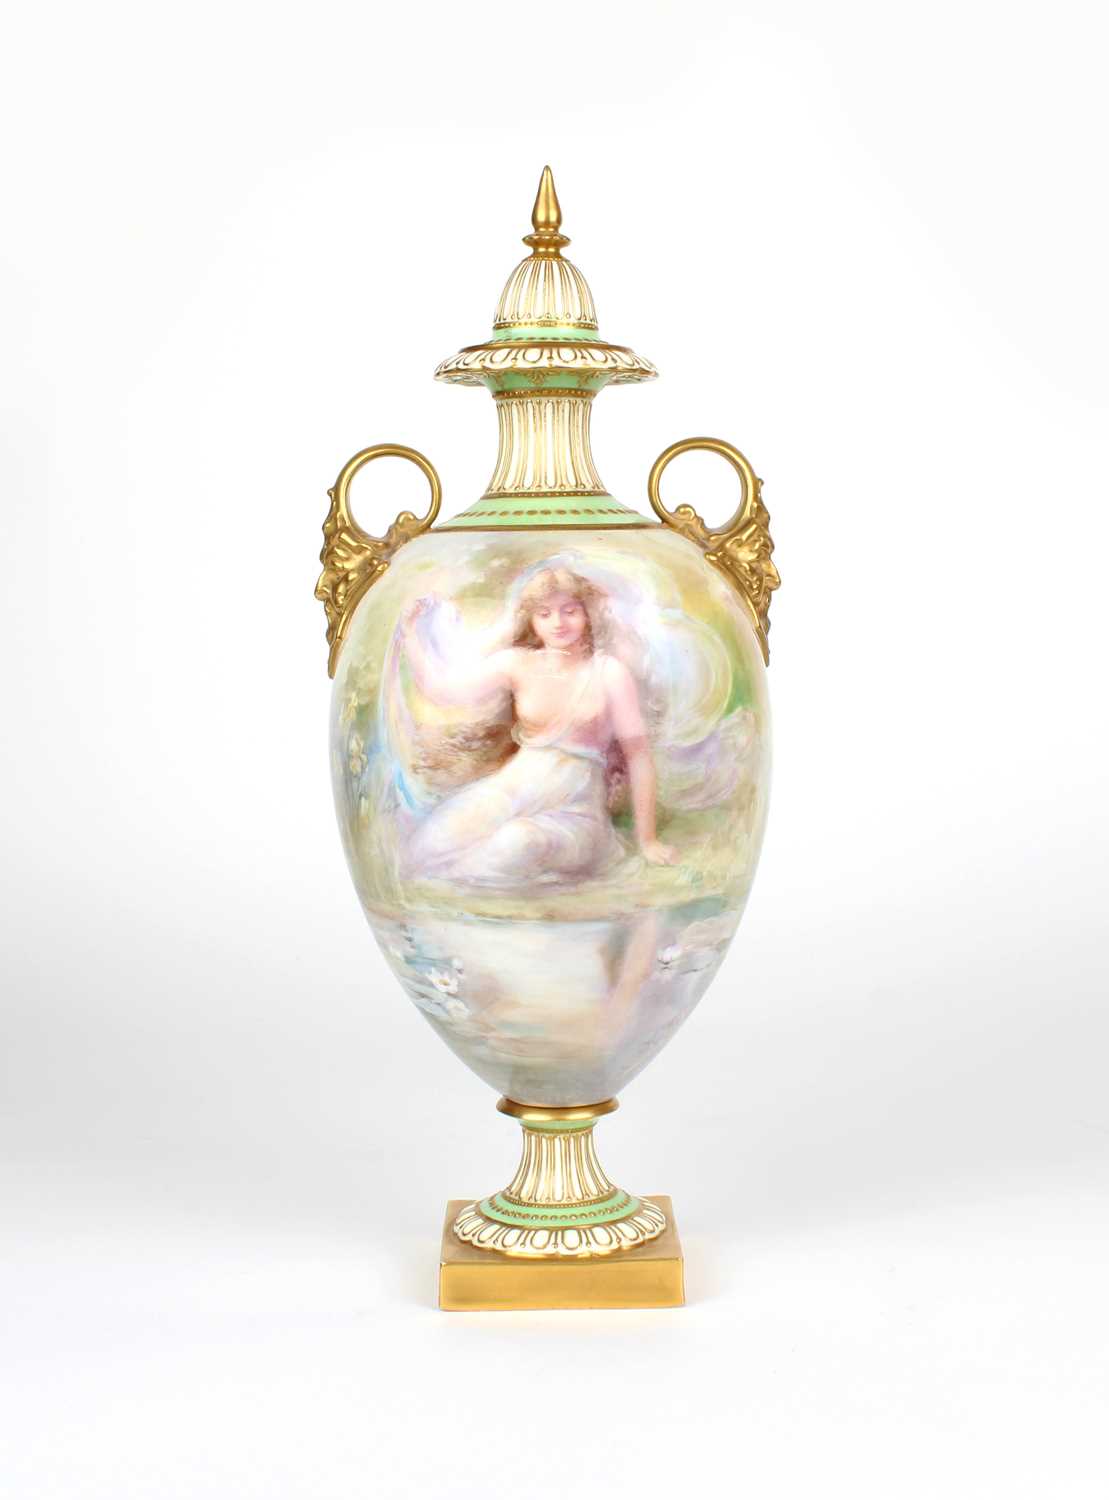 George White for Royal Doulton "Leda and the Swan" Urn